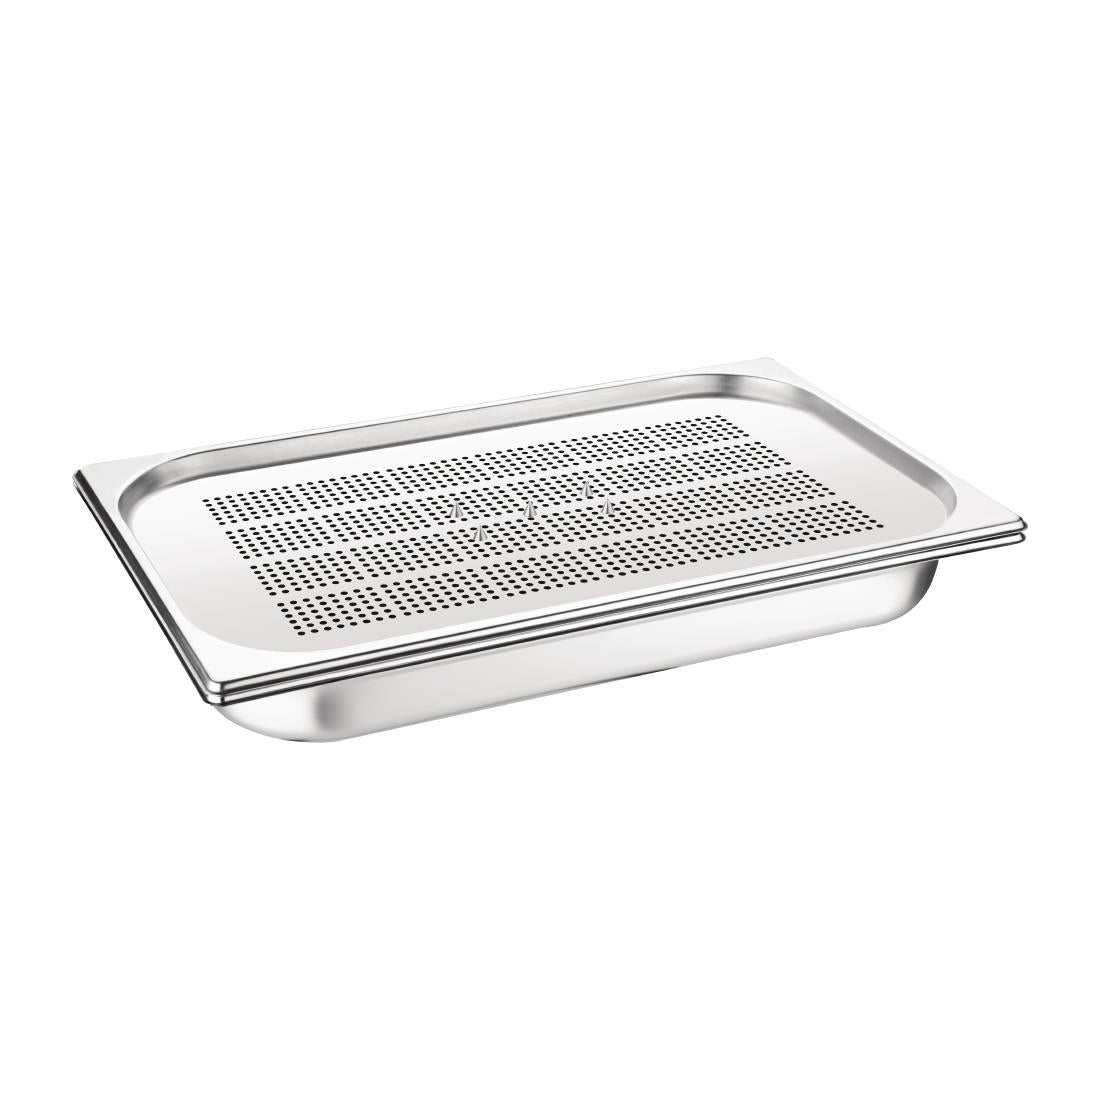 DN911 Vogue Stainless Steel Perforated Spiked Meat Dish JD Catering Equipment Solutions Ltd